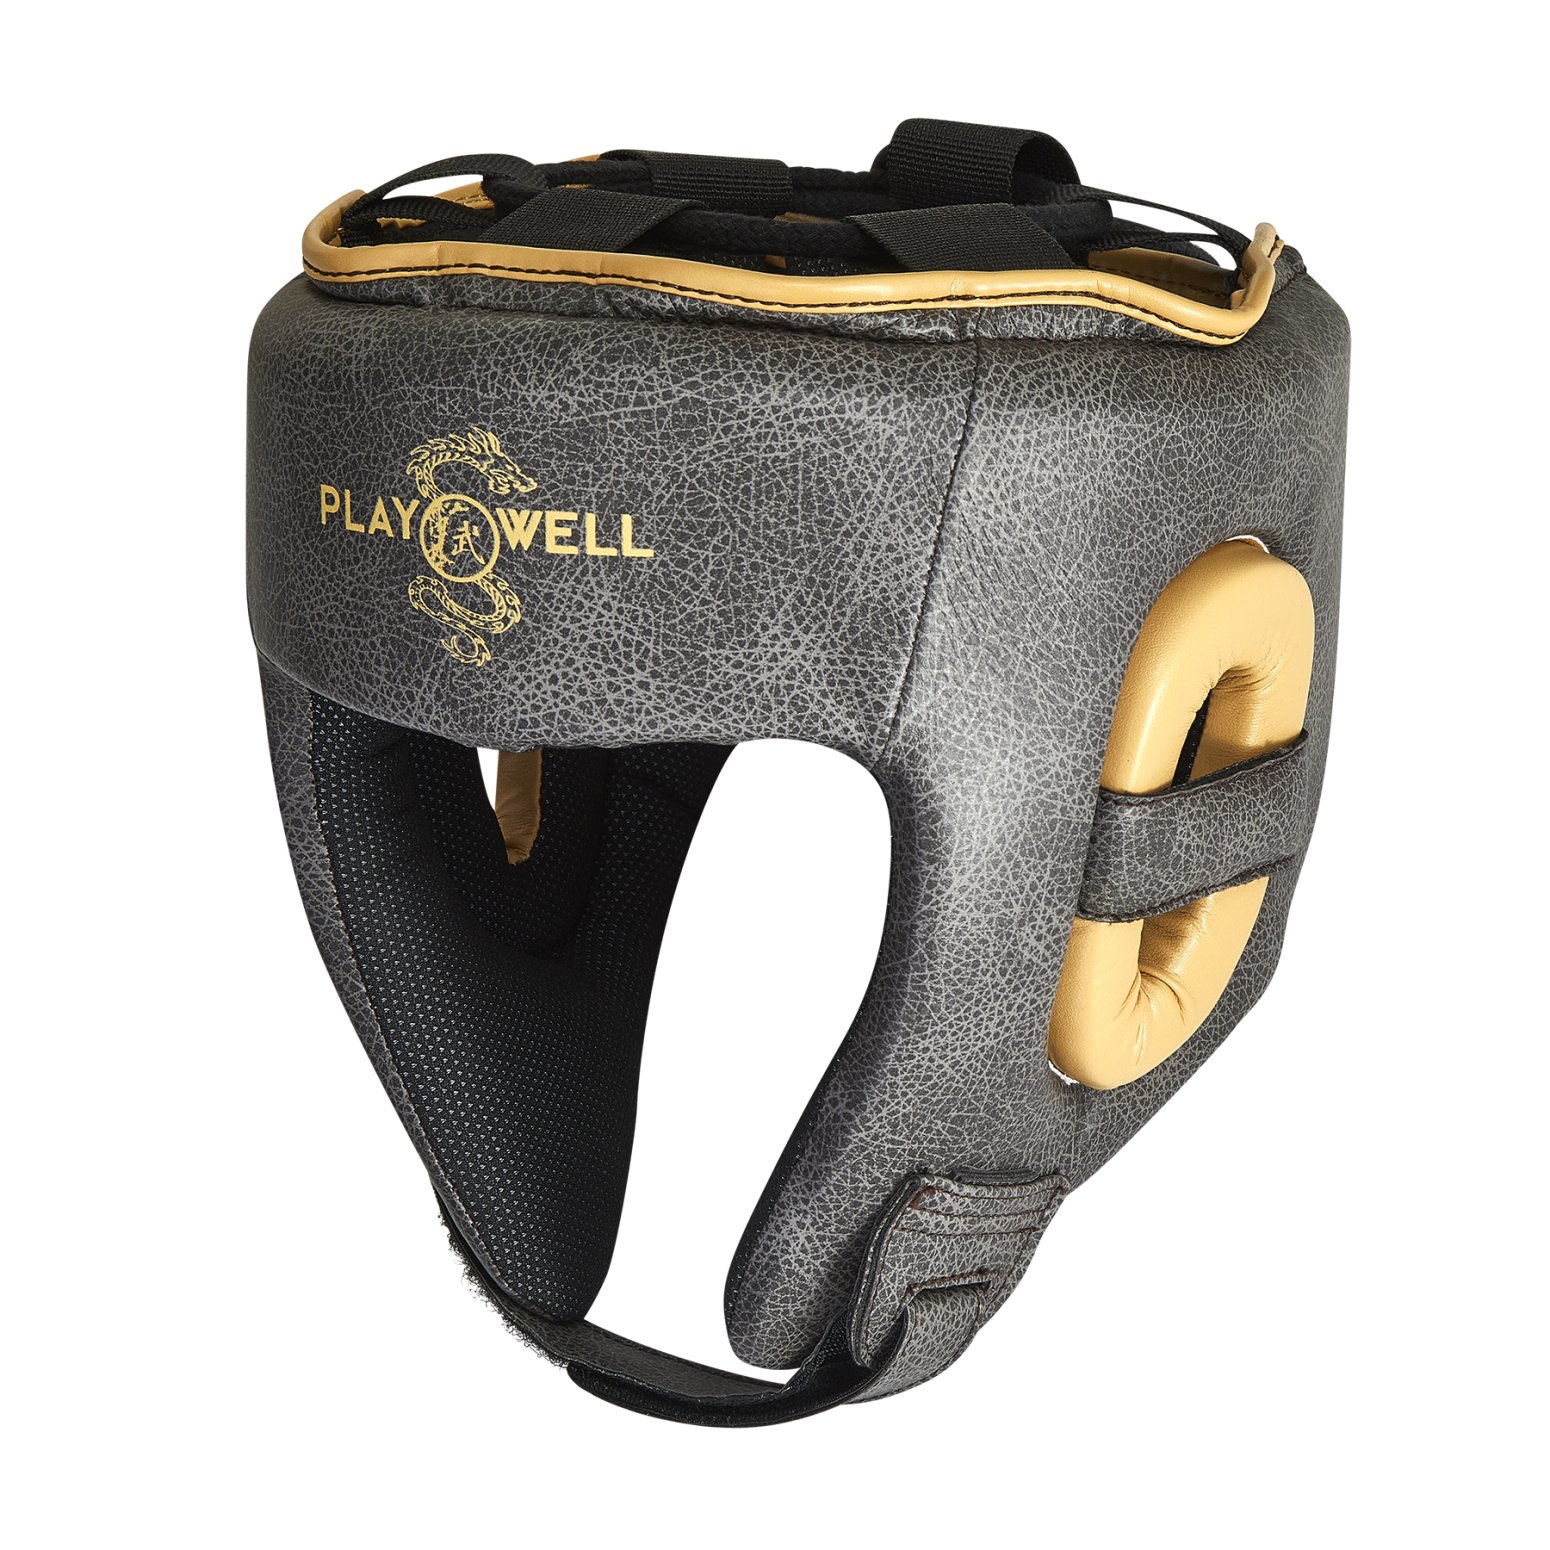 Playwell "Vintage Series" Boxing / MMA Head Guard - Click Image to Close